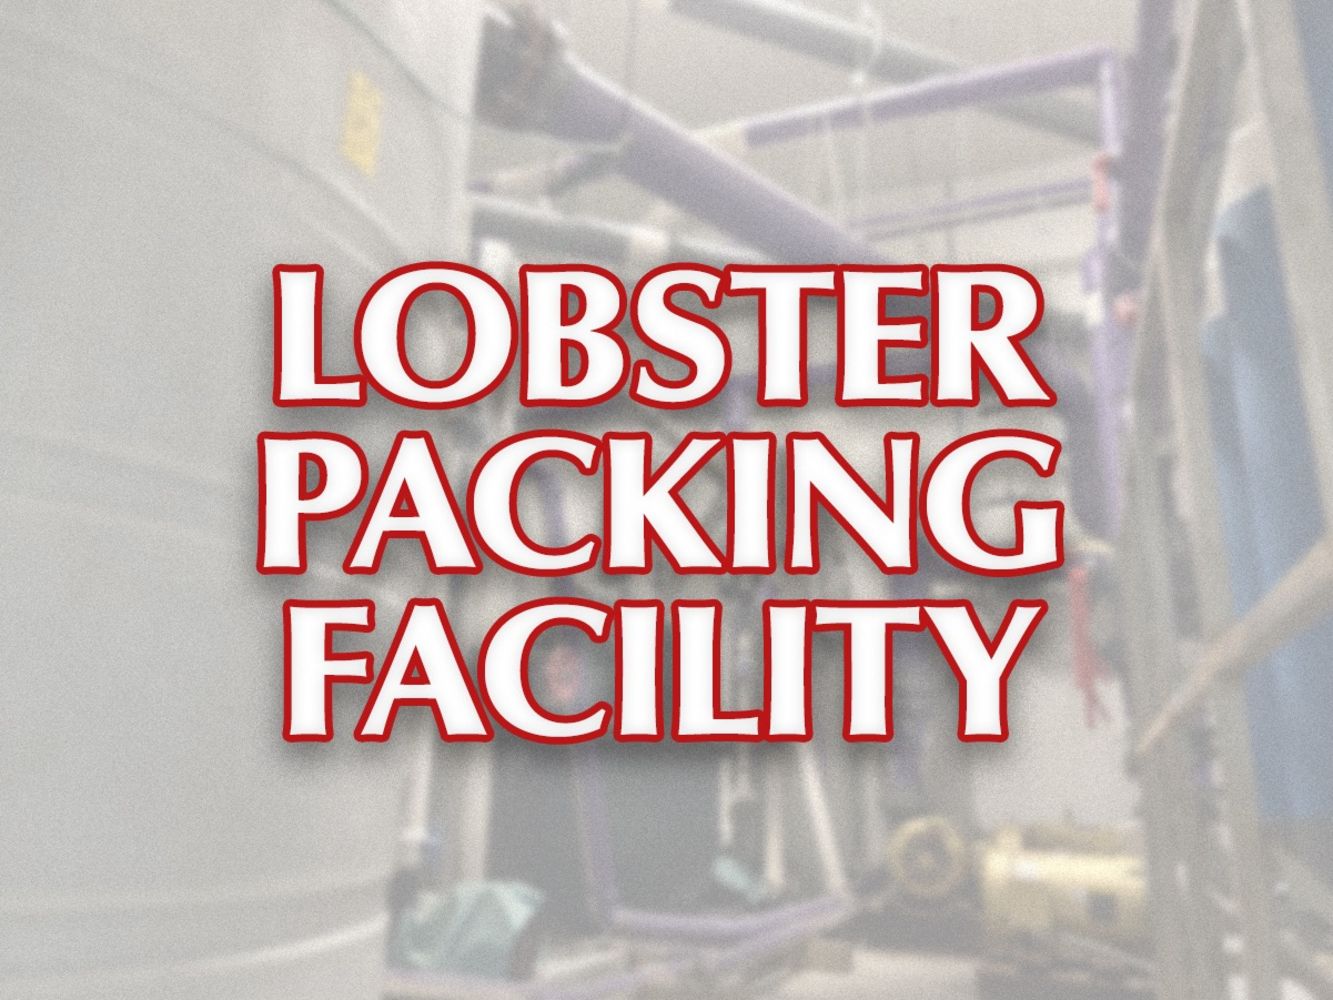 Lobster Packing Facility • Seafood grading and shipping facility • By order of the Circuit Court of Cook County, IL